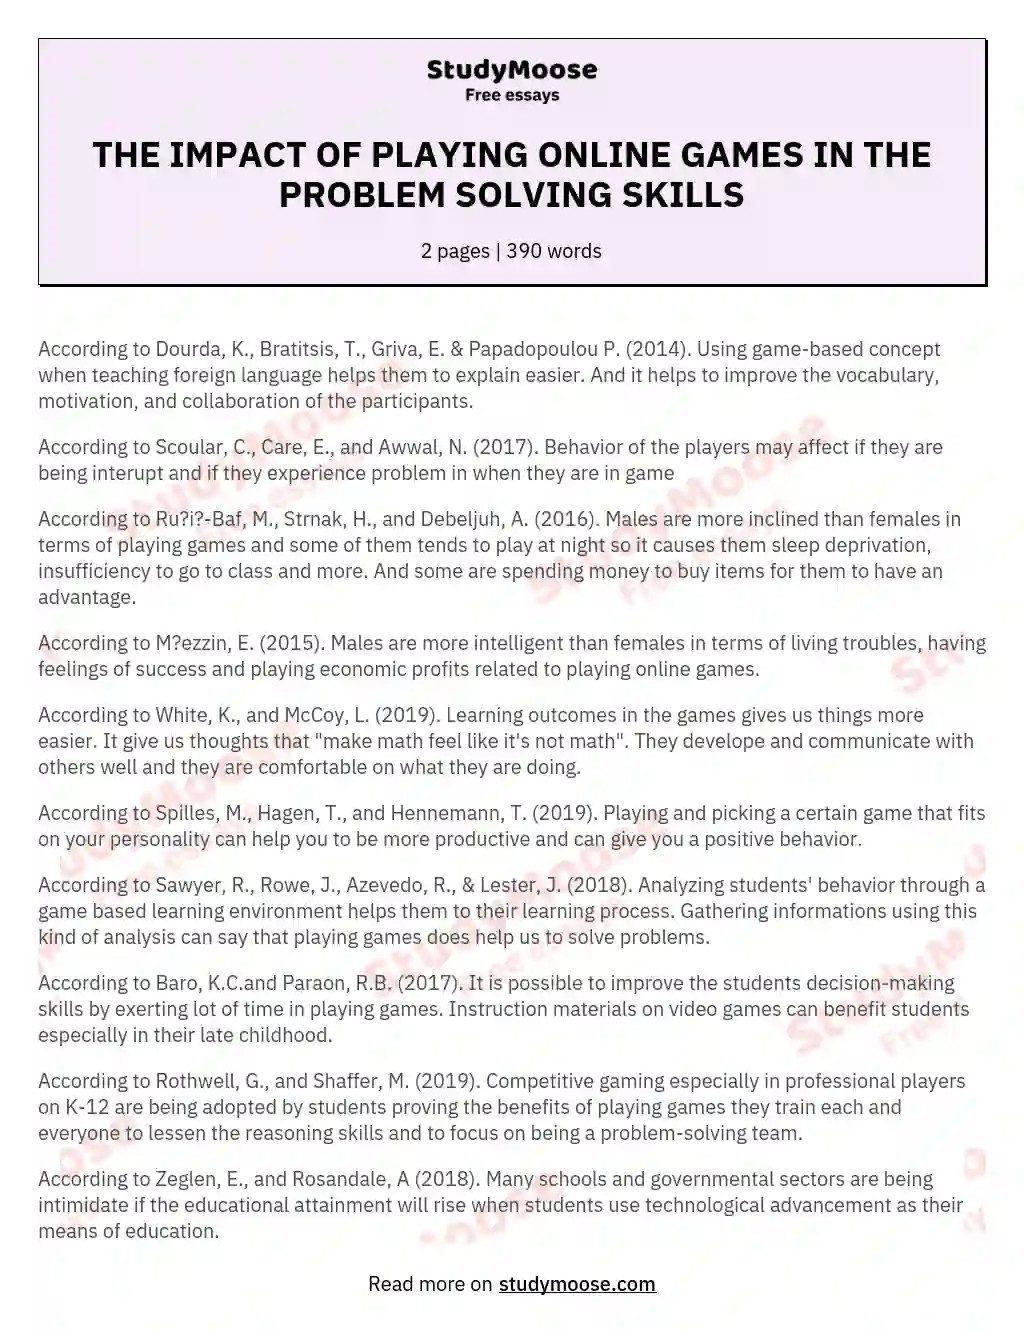 THE IMPACT OF PLAYING ONLINE GAMES IN THE PROBLEM SOLVING SKILLS essay